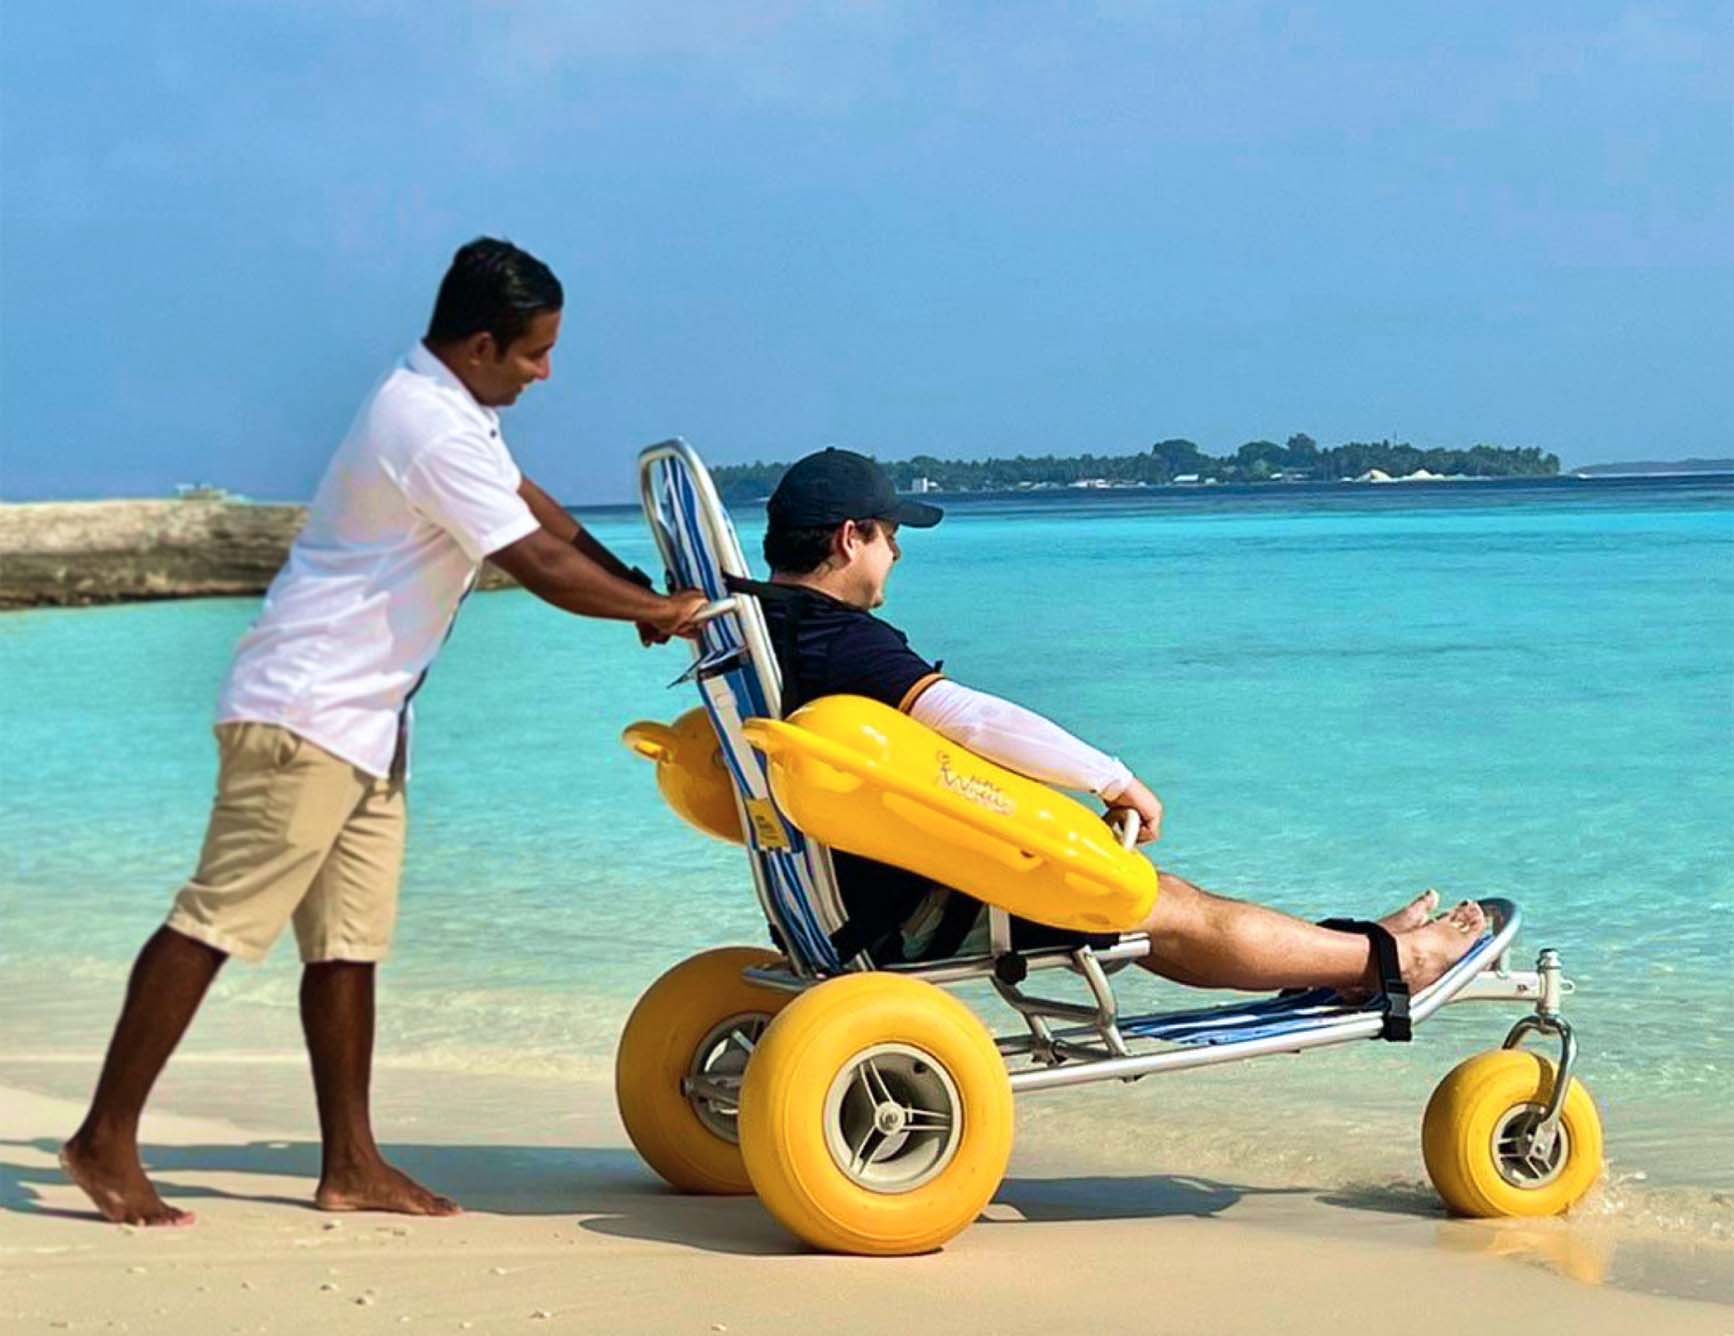 Inclusive Hospitality at Amilla includes beach wheelchairs